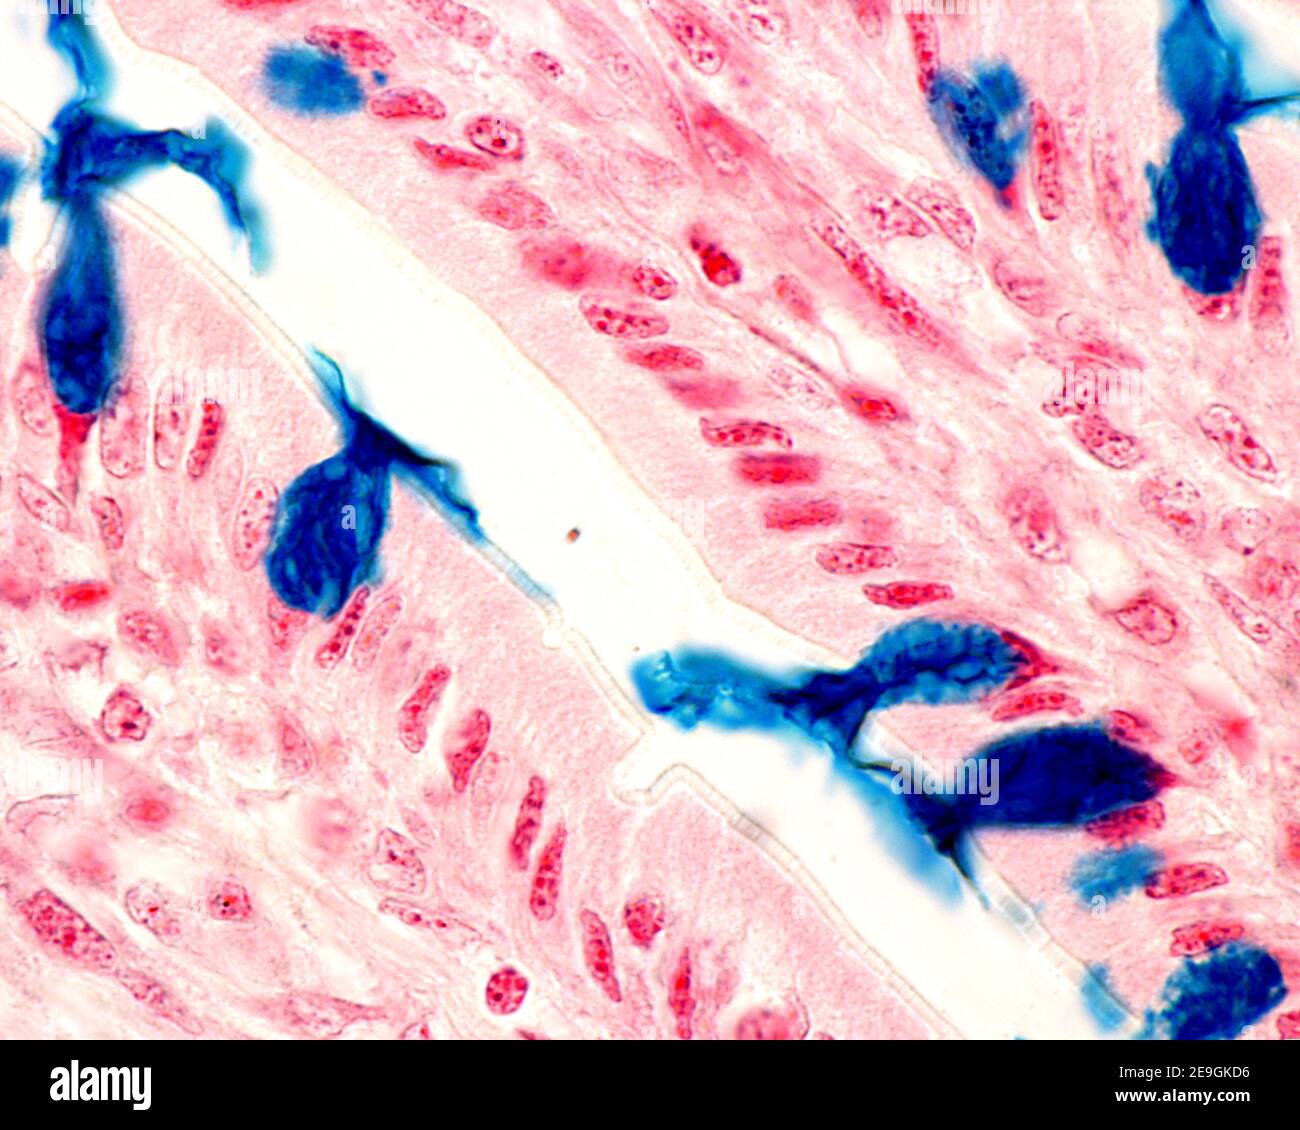 High magnification showing goblet cells, with their mucous secretion stained in blue, located in the epithelial lining of the small intestine villi. M Stock Photo